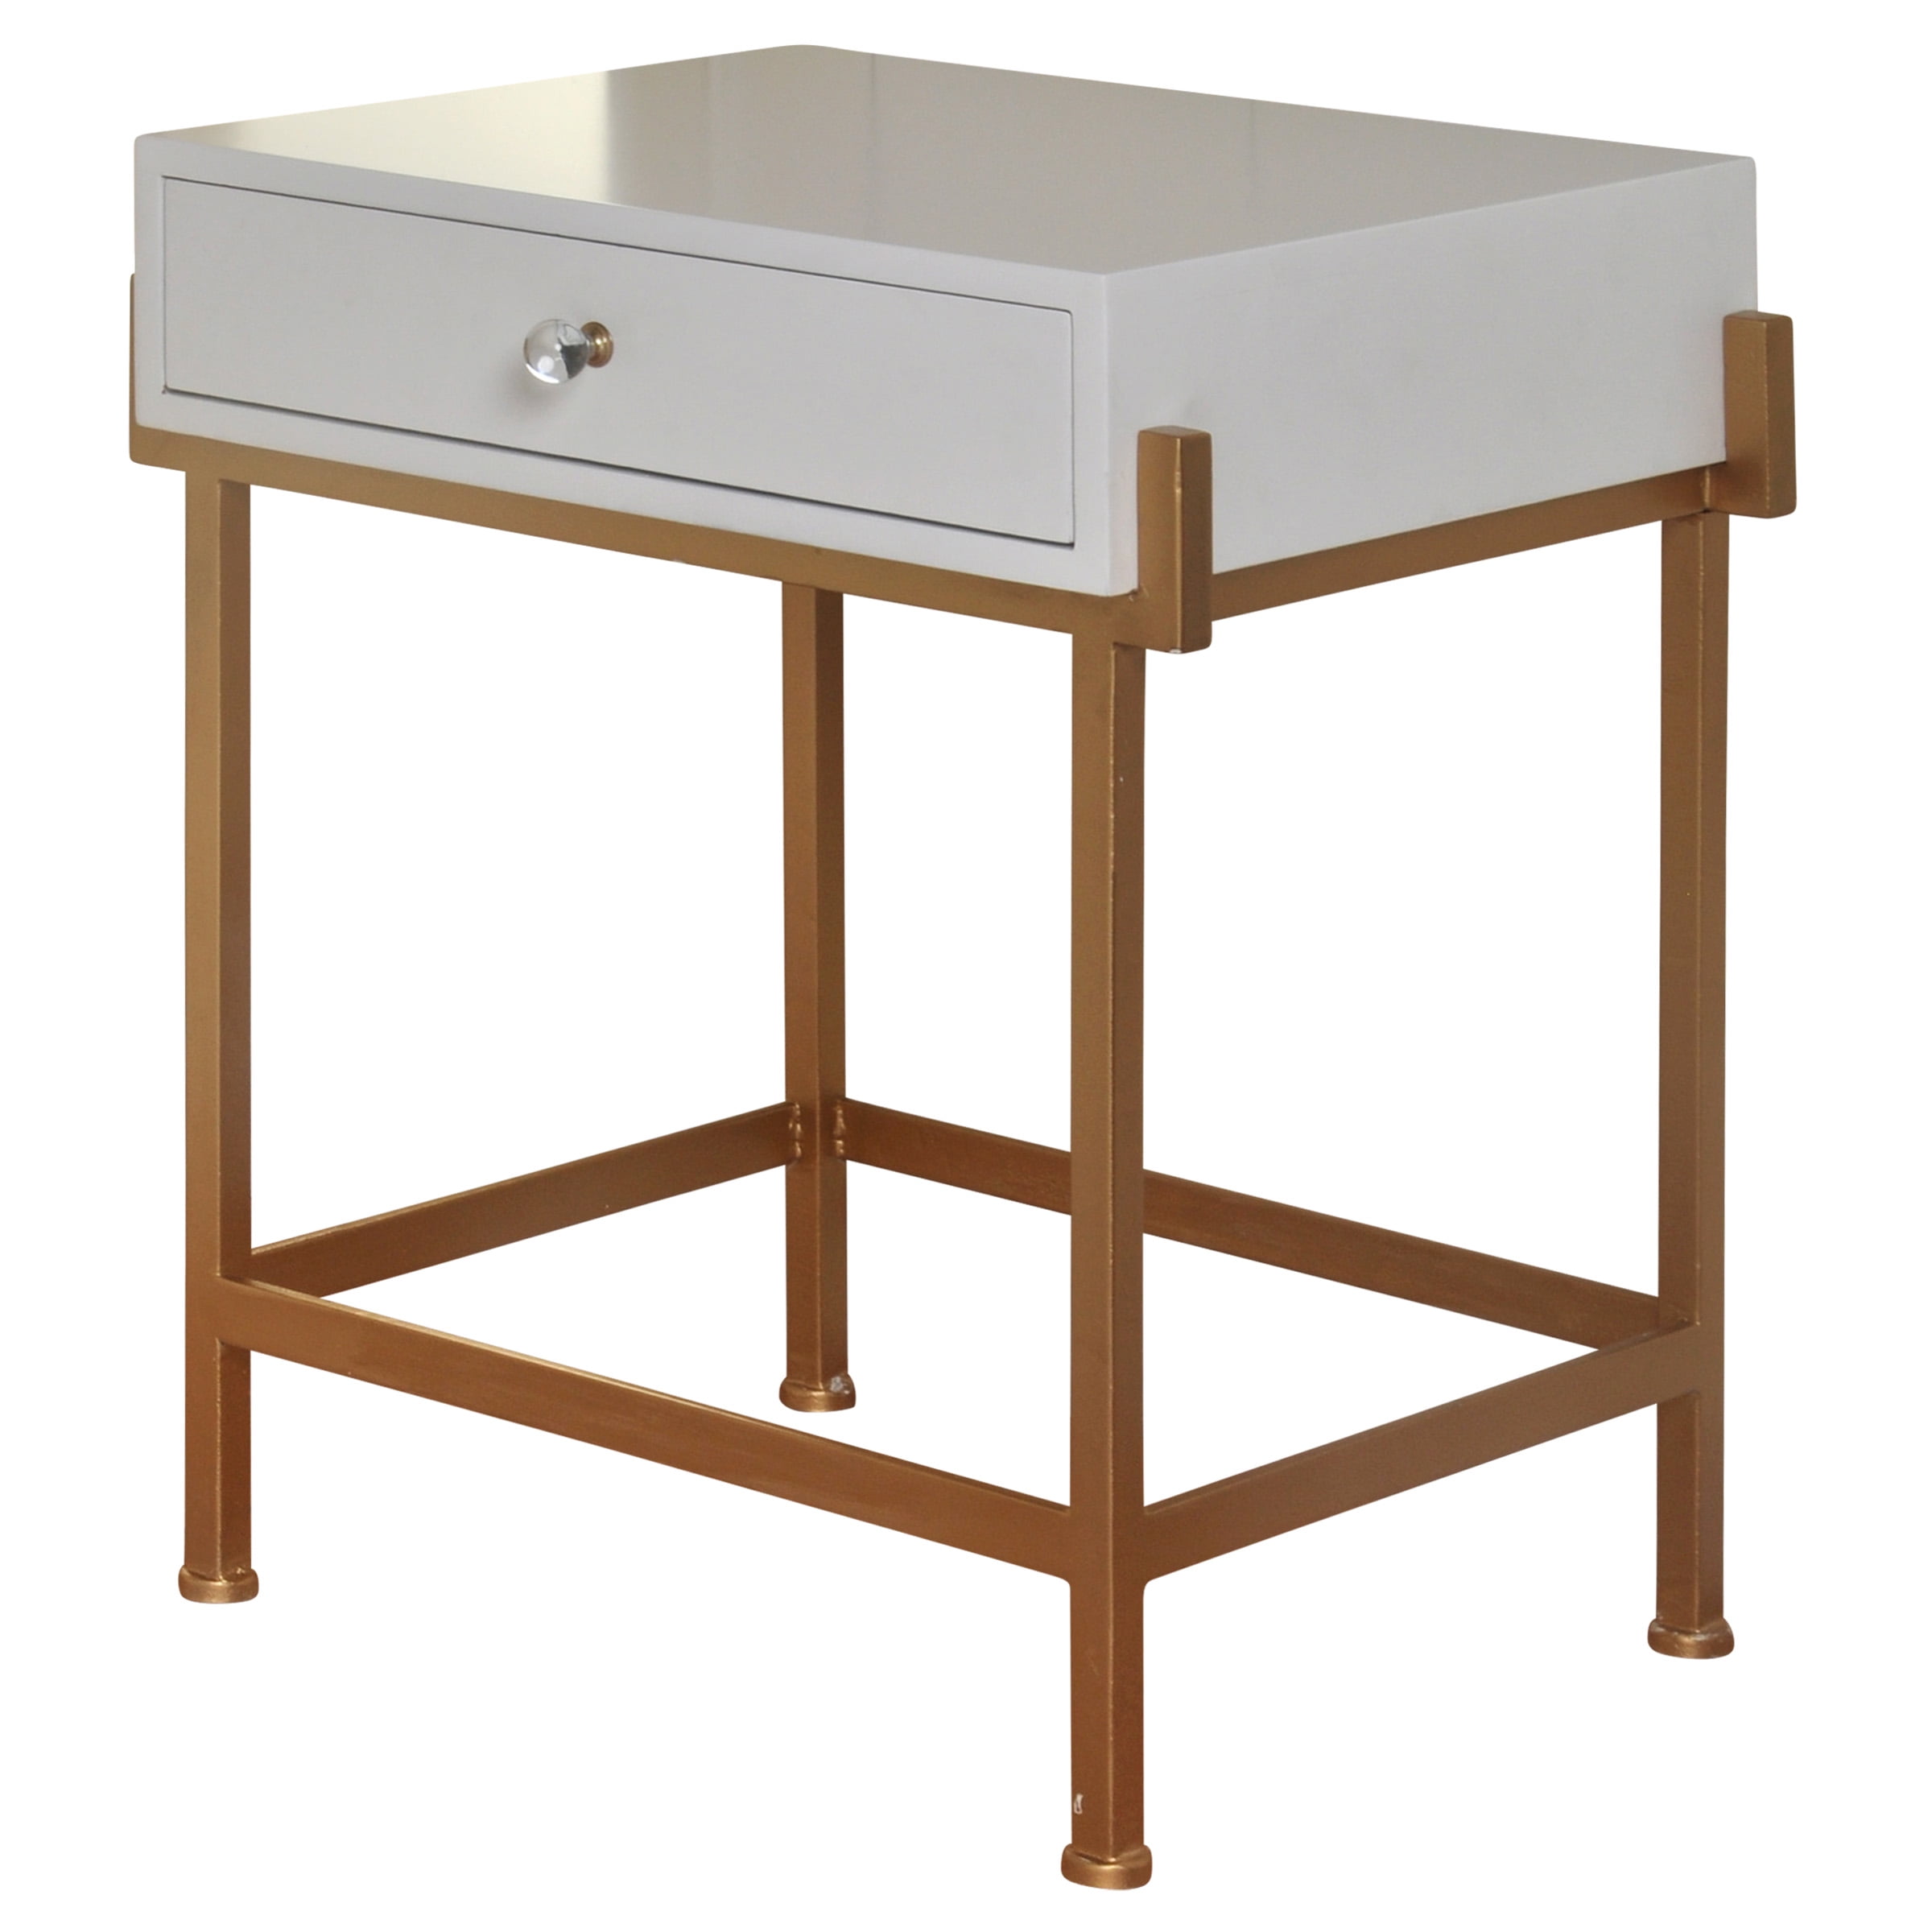 Volgen Bijna dichtbij GwG Outlet White Lacquered Side Table in Antique Gold Finish - Walmart.com